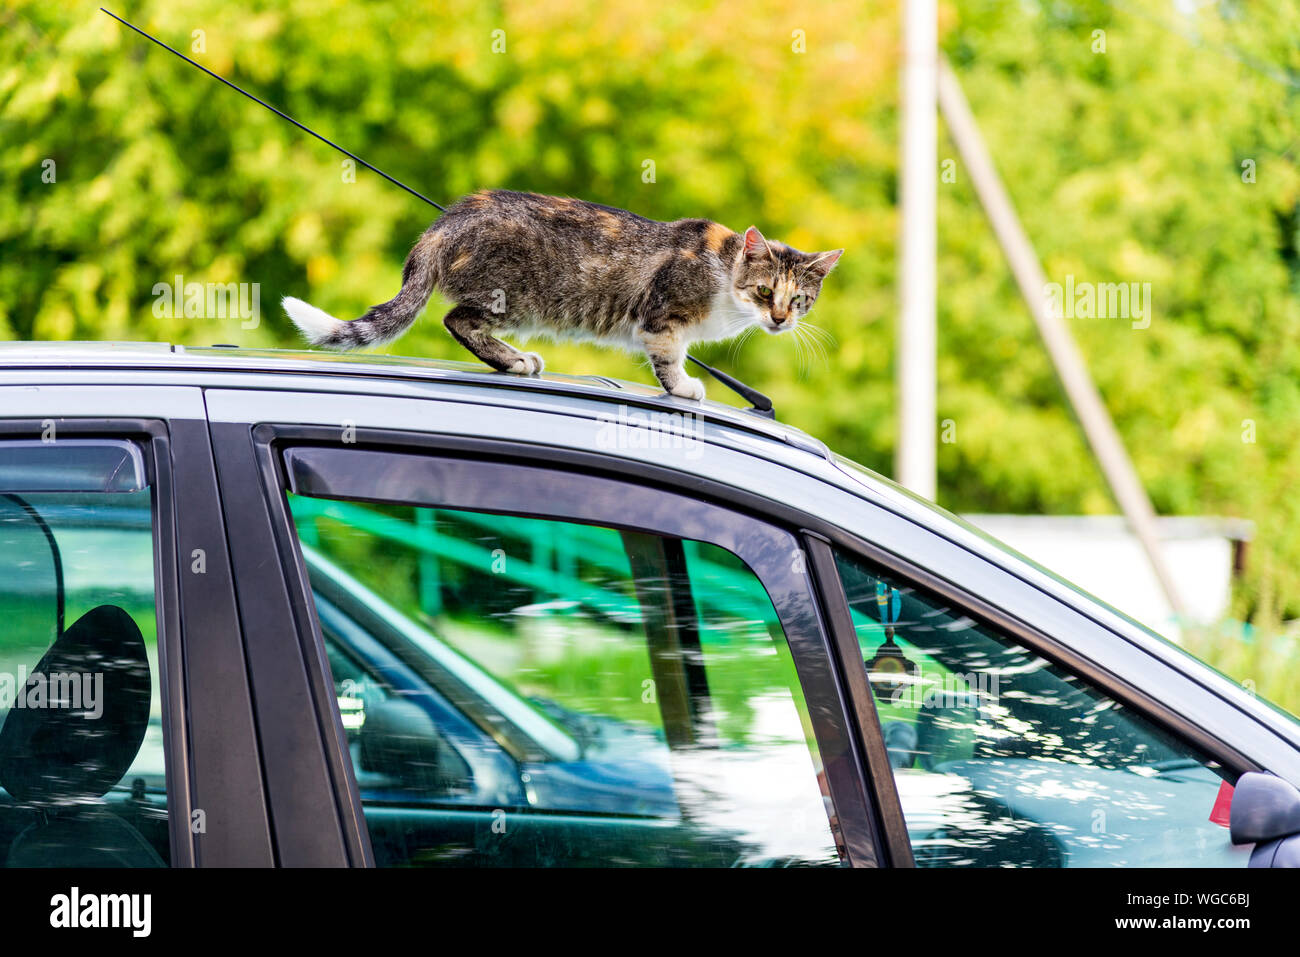 A cat on the car, a homeless cat climbed onto the roof of a car Stock Photo